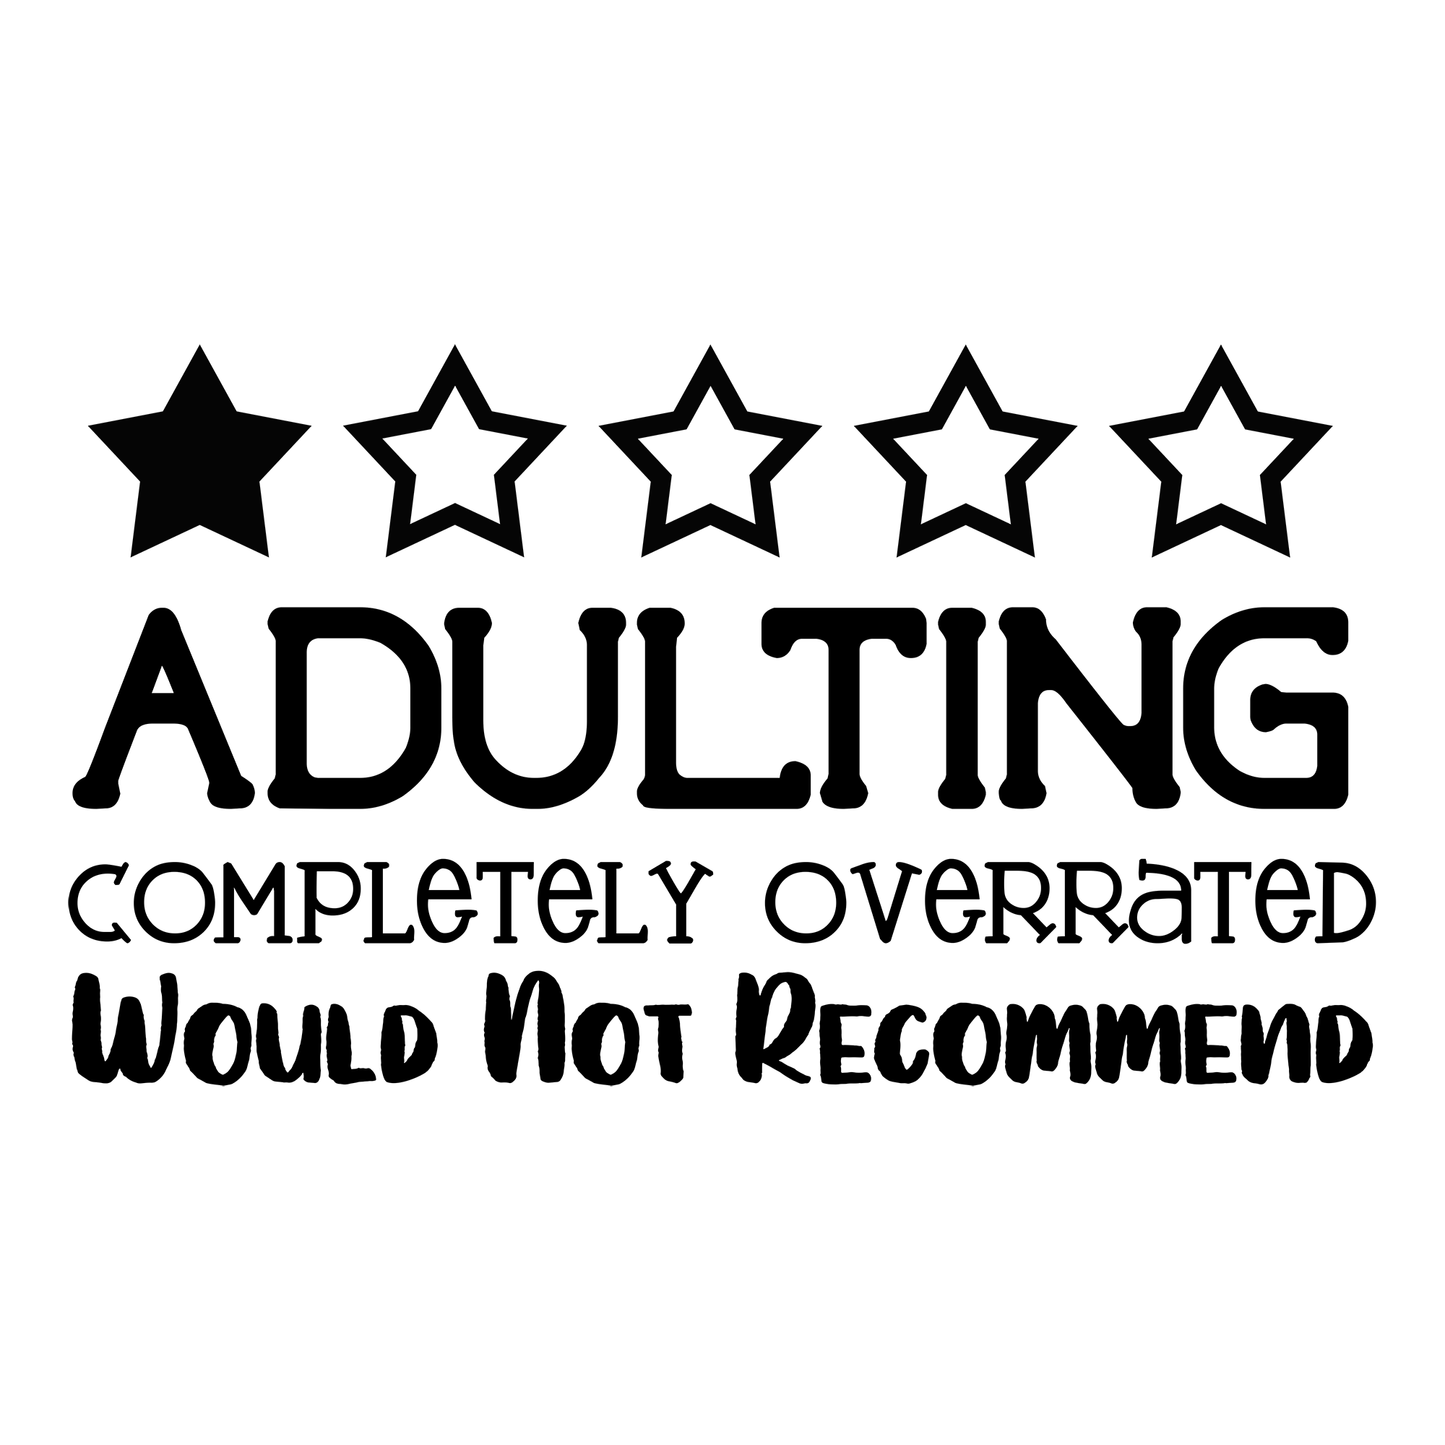 Adulting 1 Star Would Not Recommend Vinyl Decal Sticker